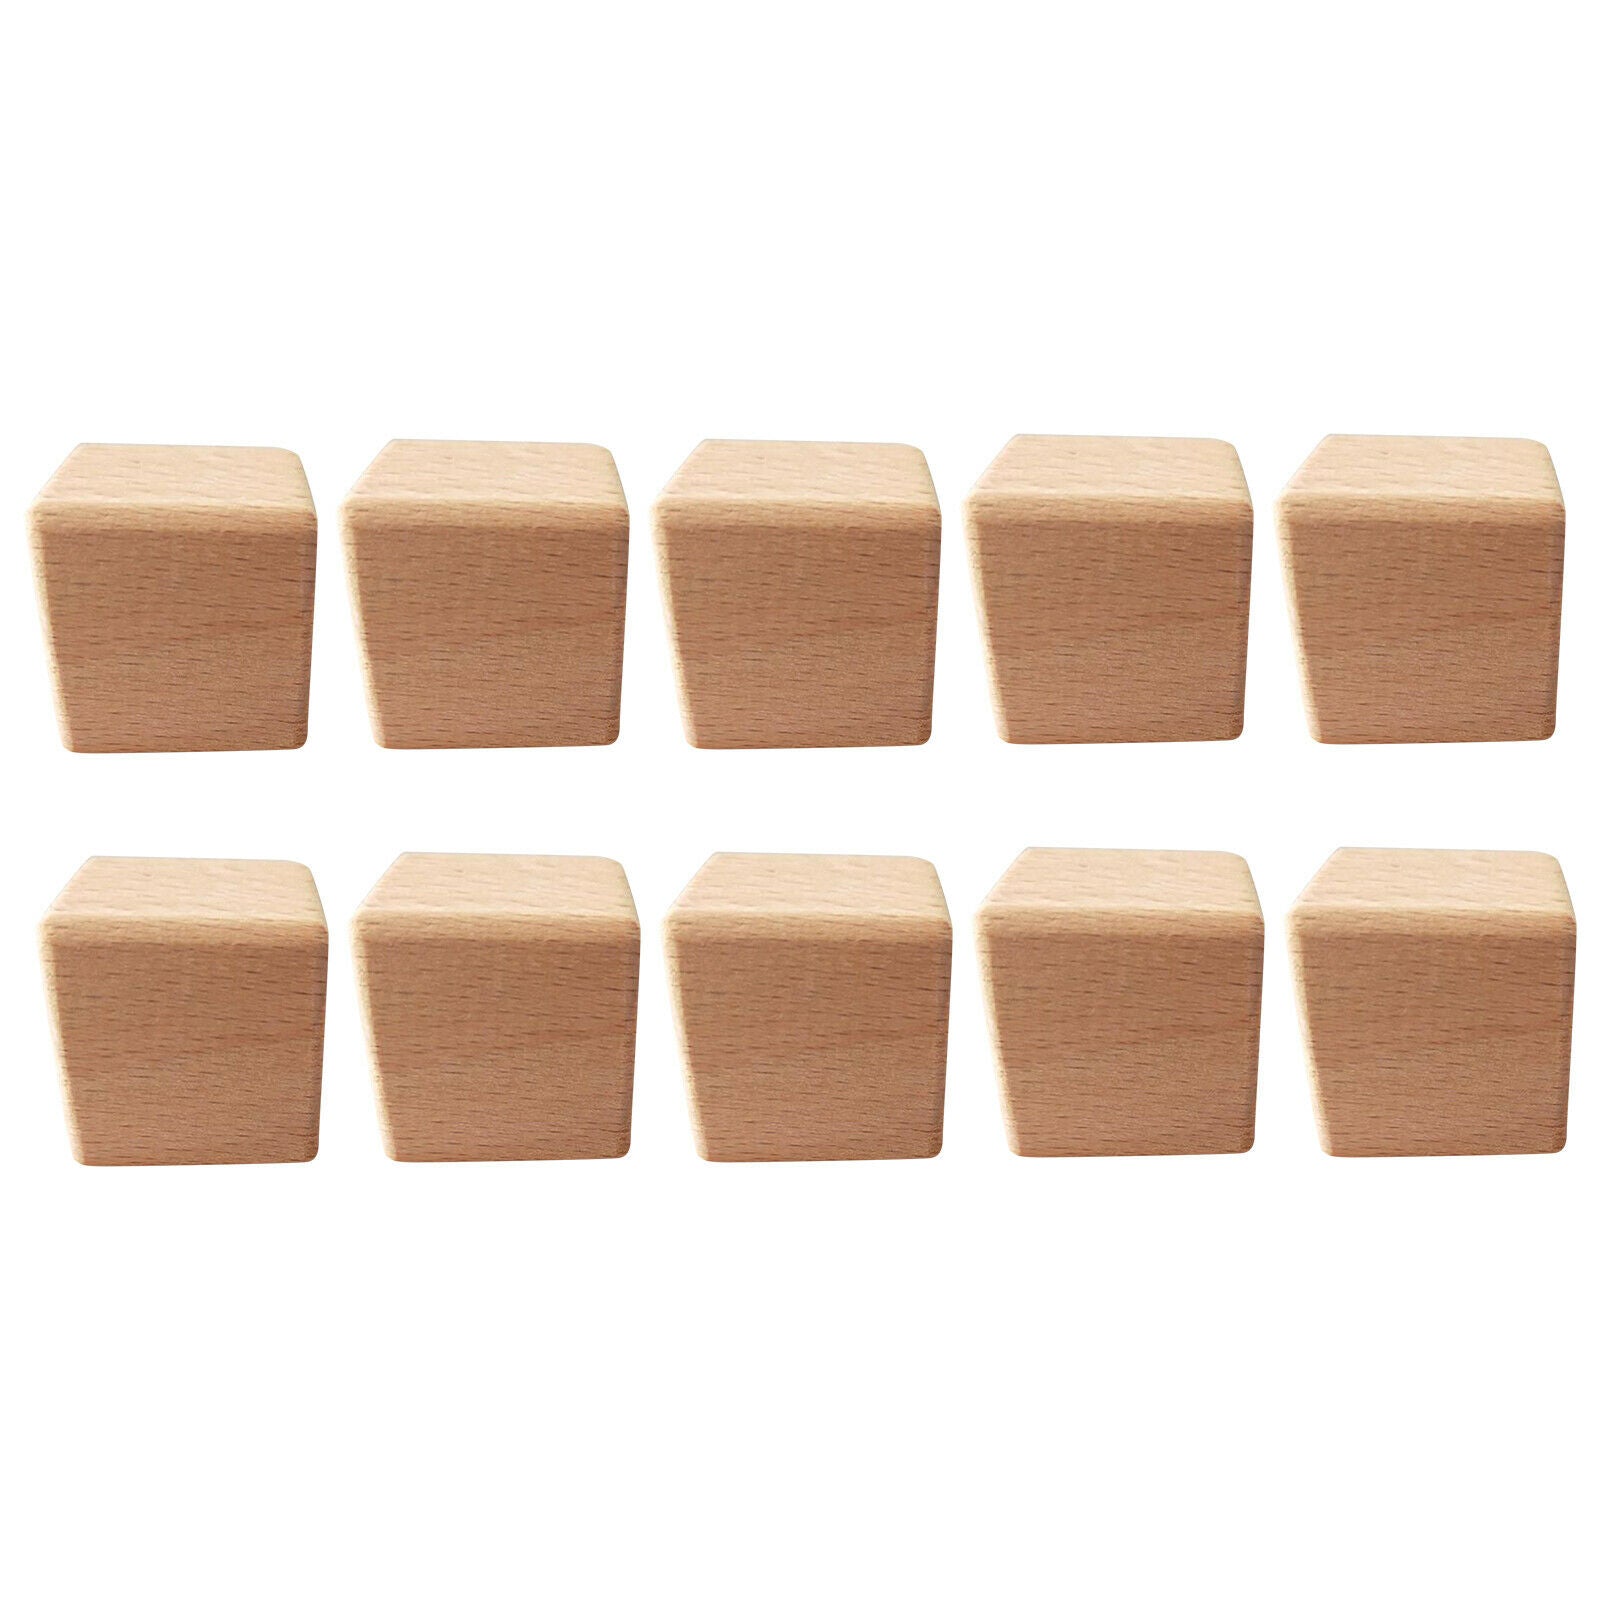 10 Pieces of Square Wooden Cube Children's Toys Building Blocks, 10 Pieces of